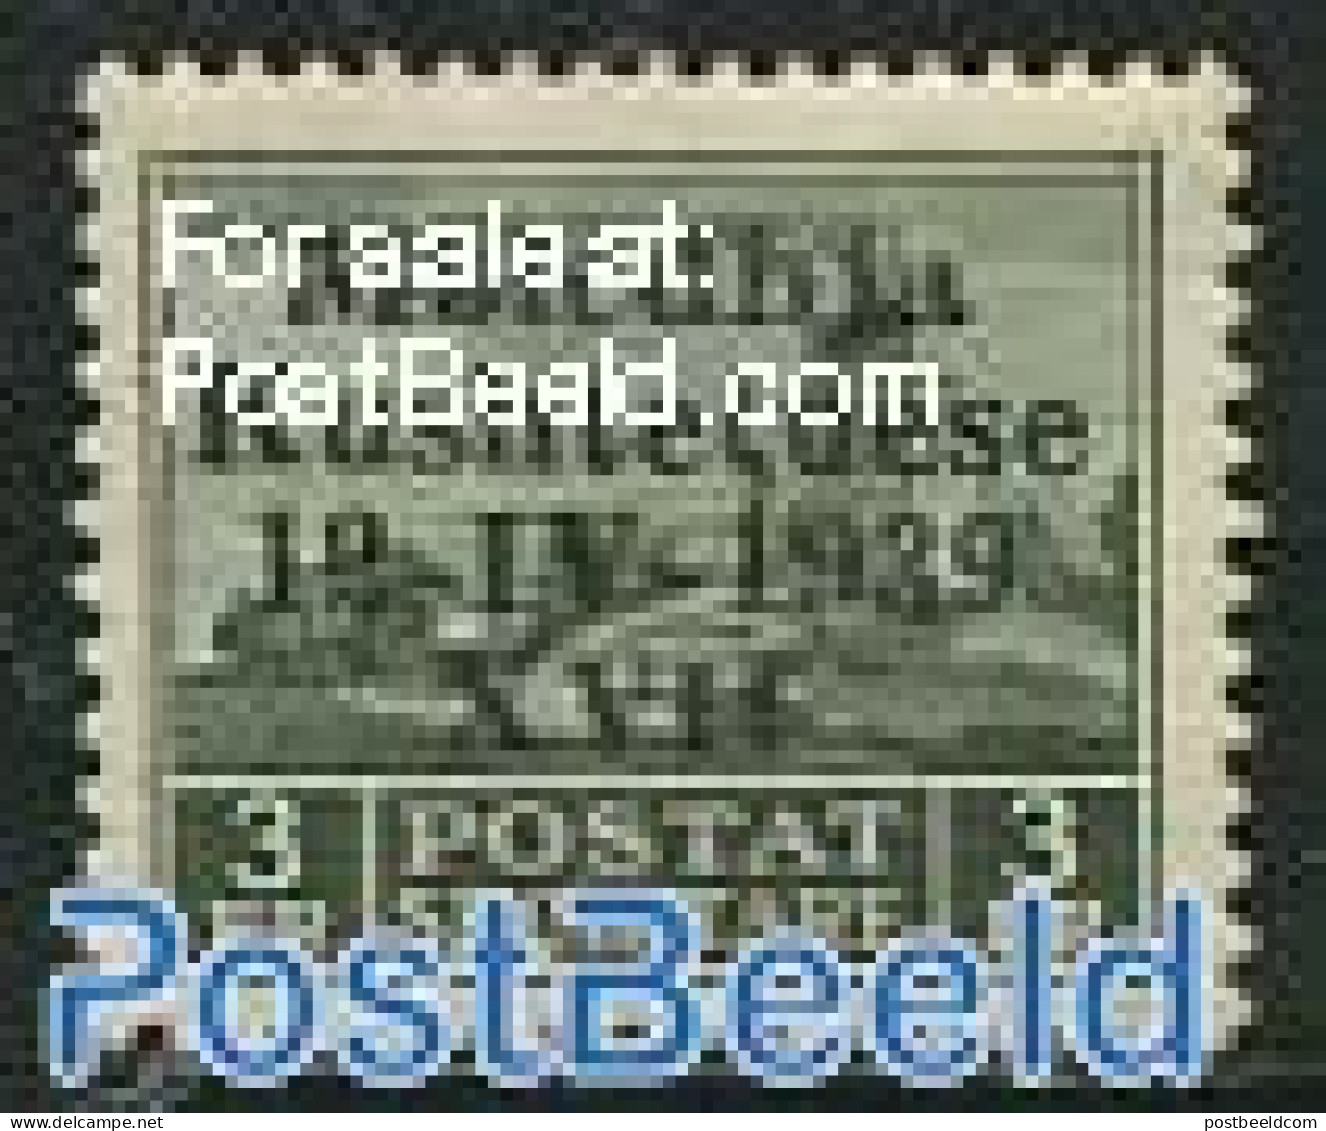 Albania 1939 3Fr, Stamp Out Of Set, Mint NH - Albania